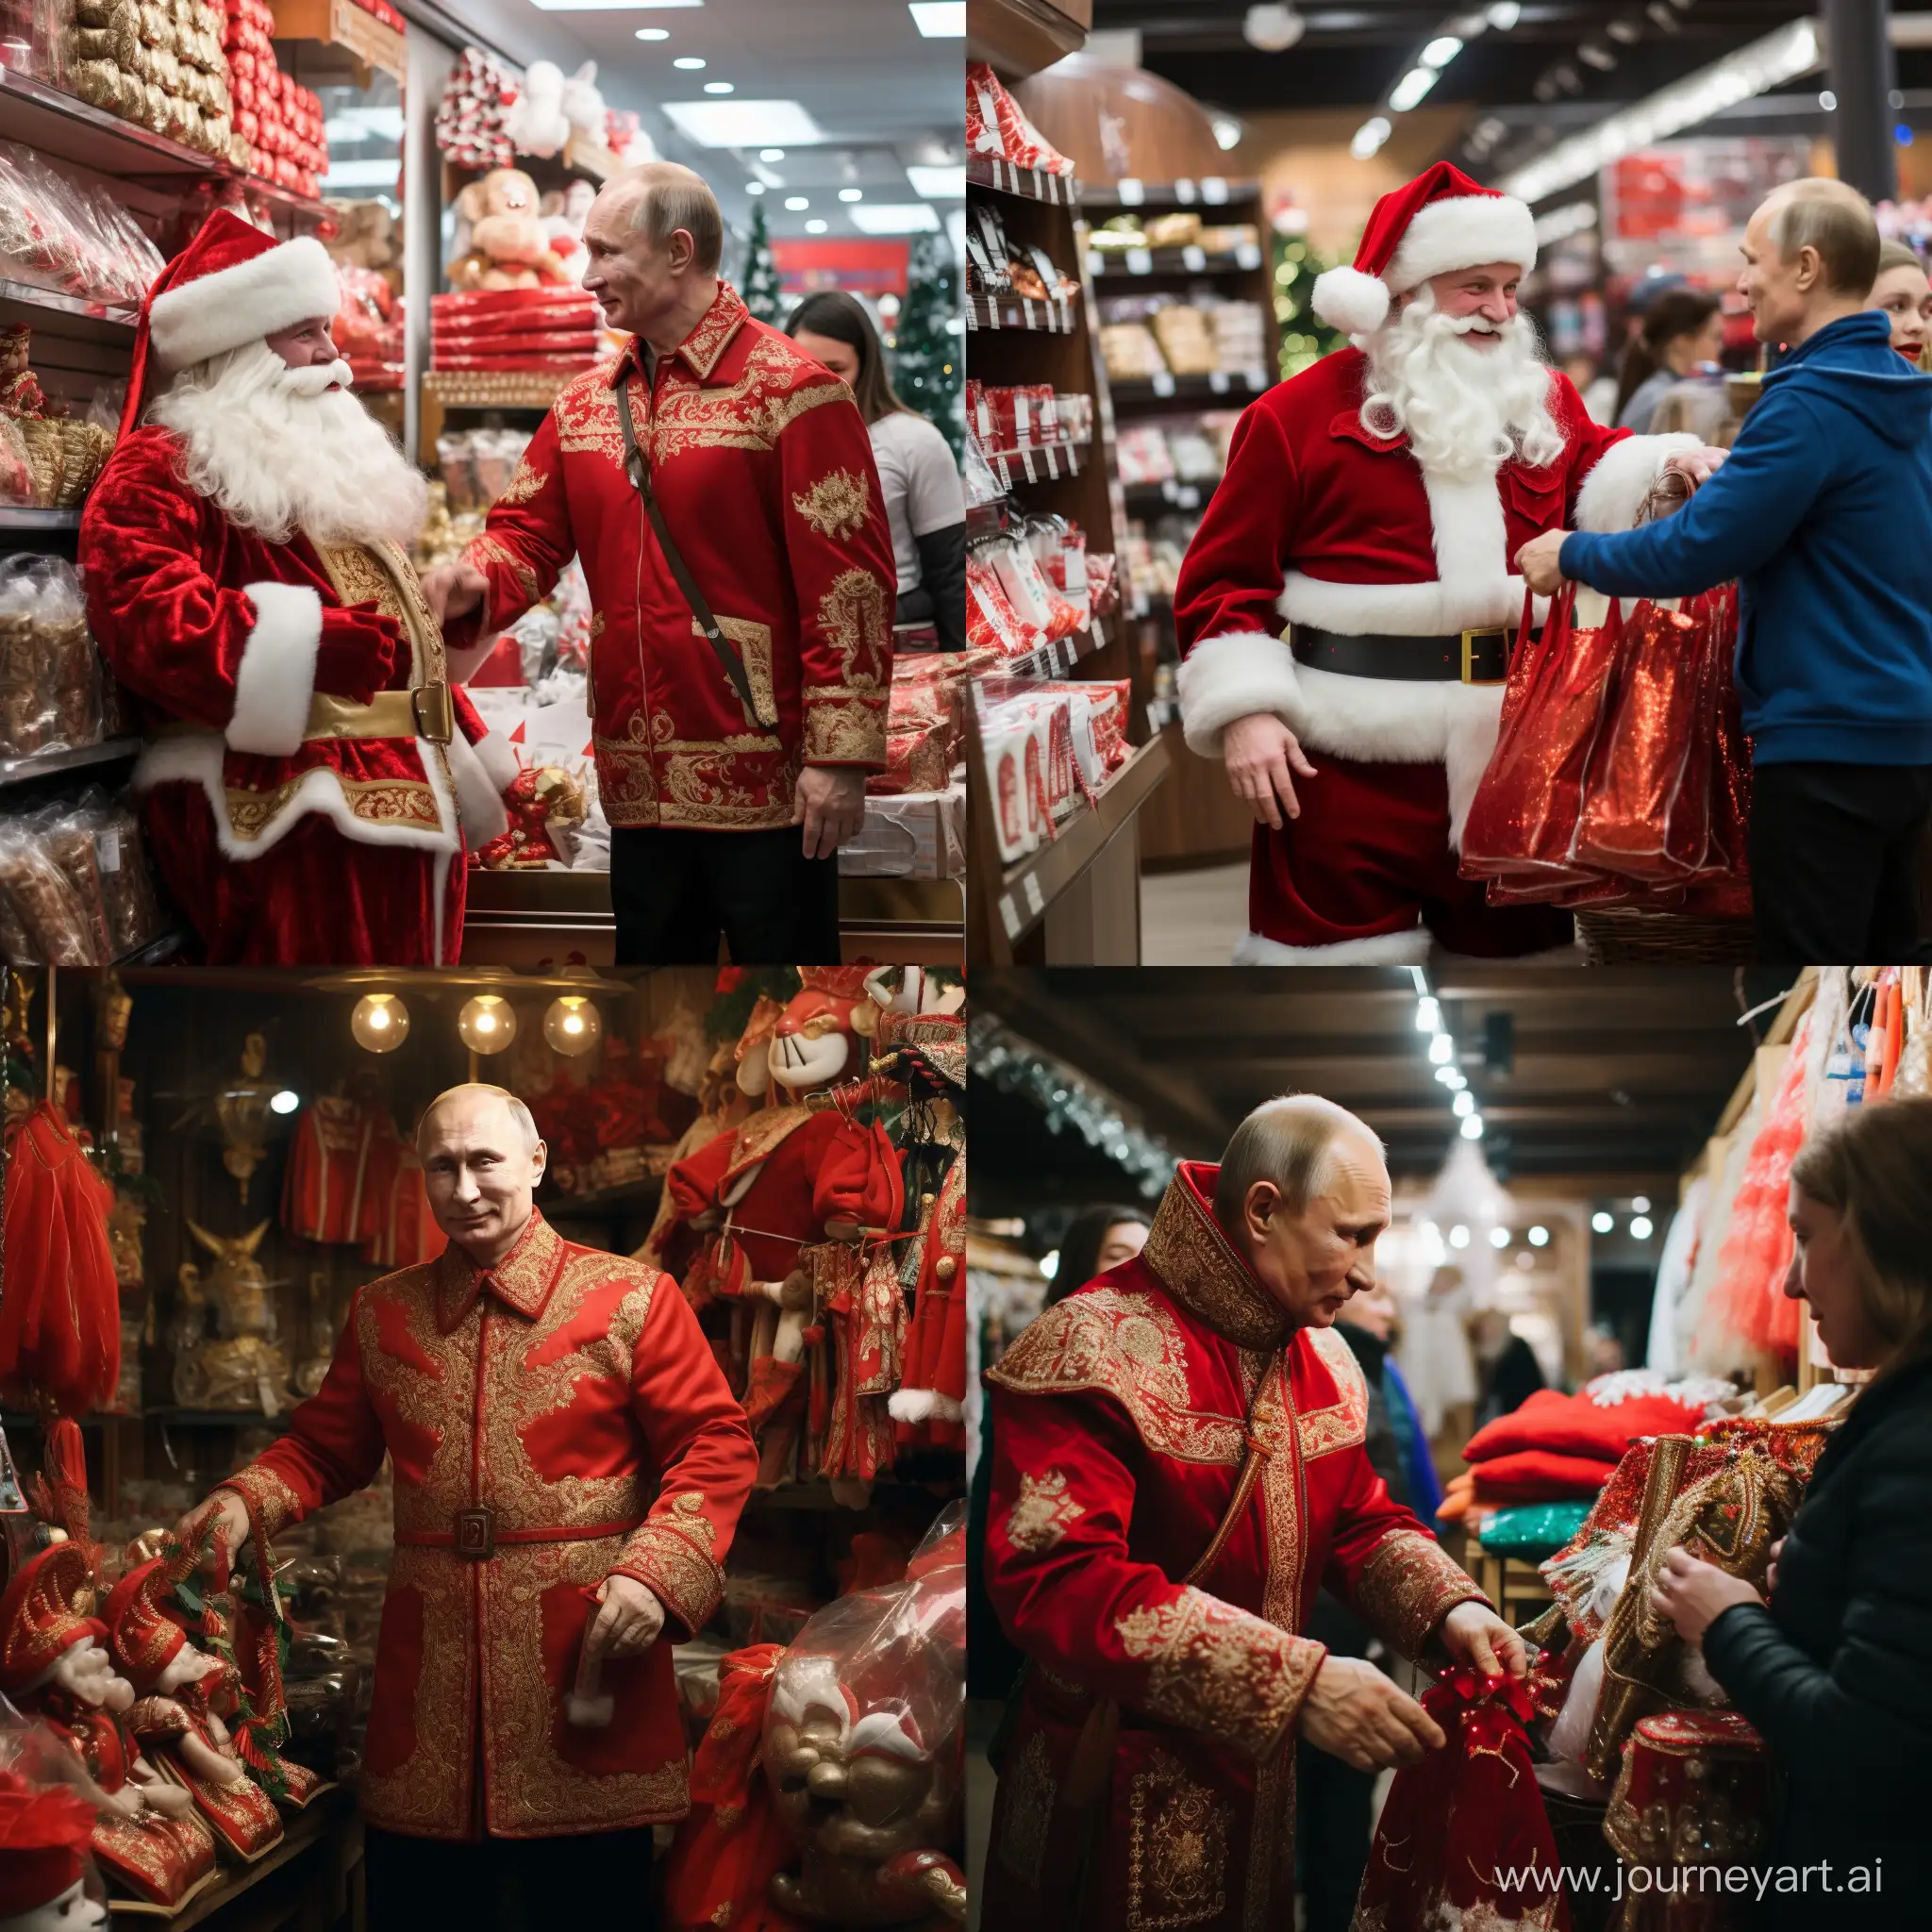 Vladimir Putin dressed as Santa Claus handing out presents in a large shop.